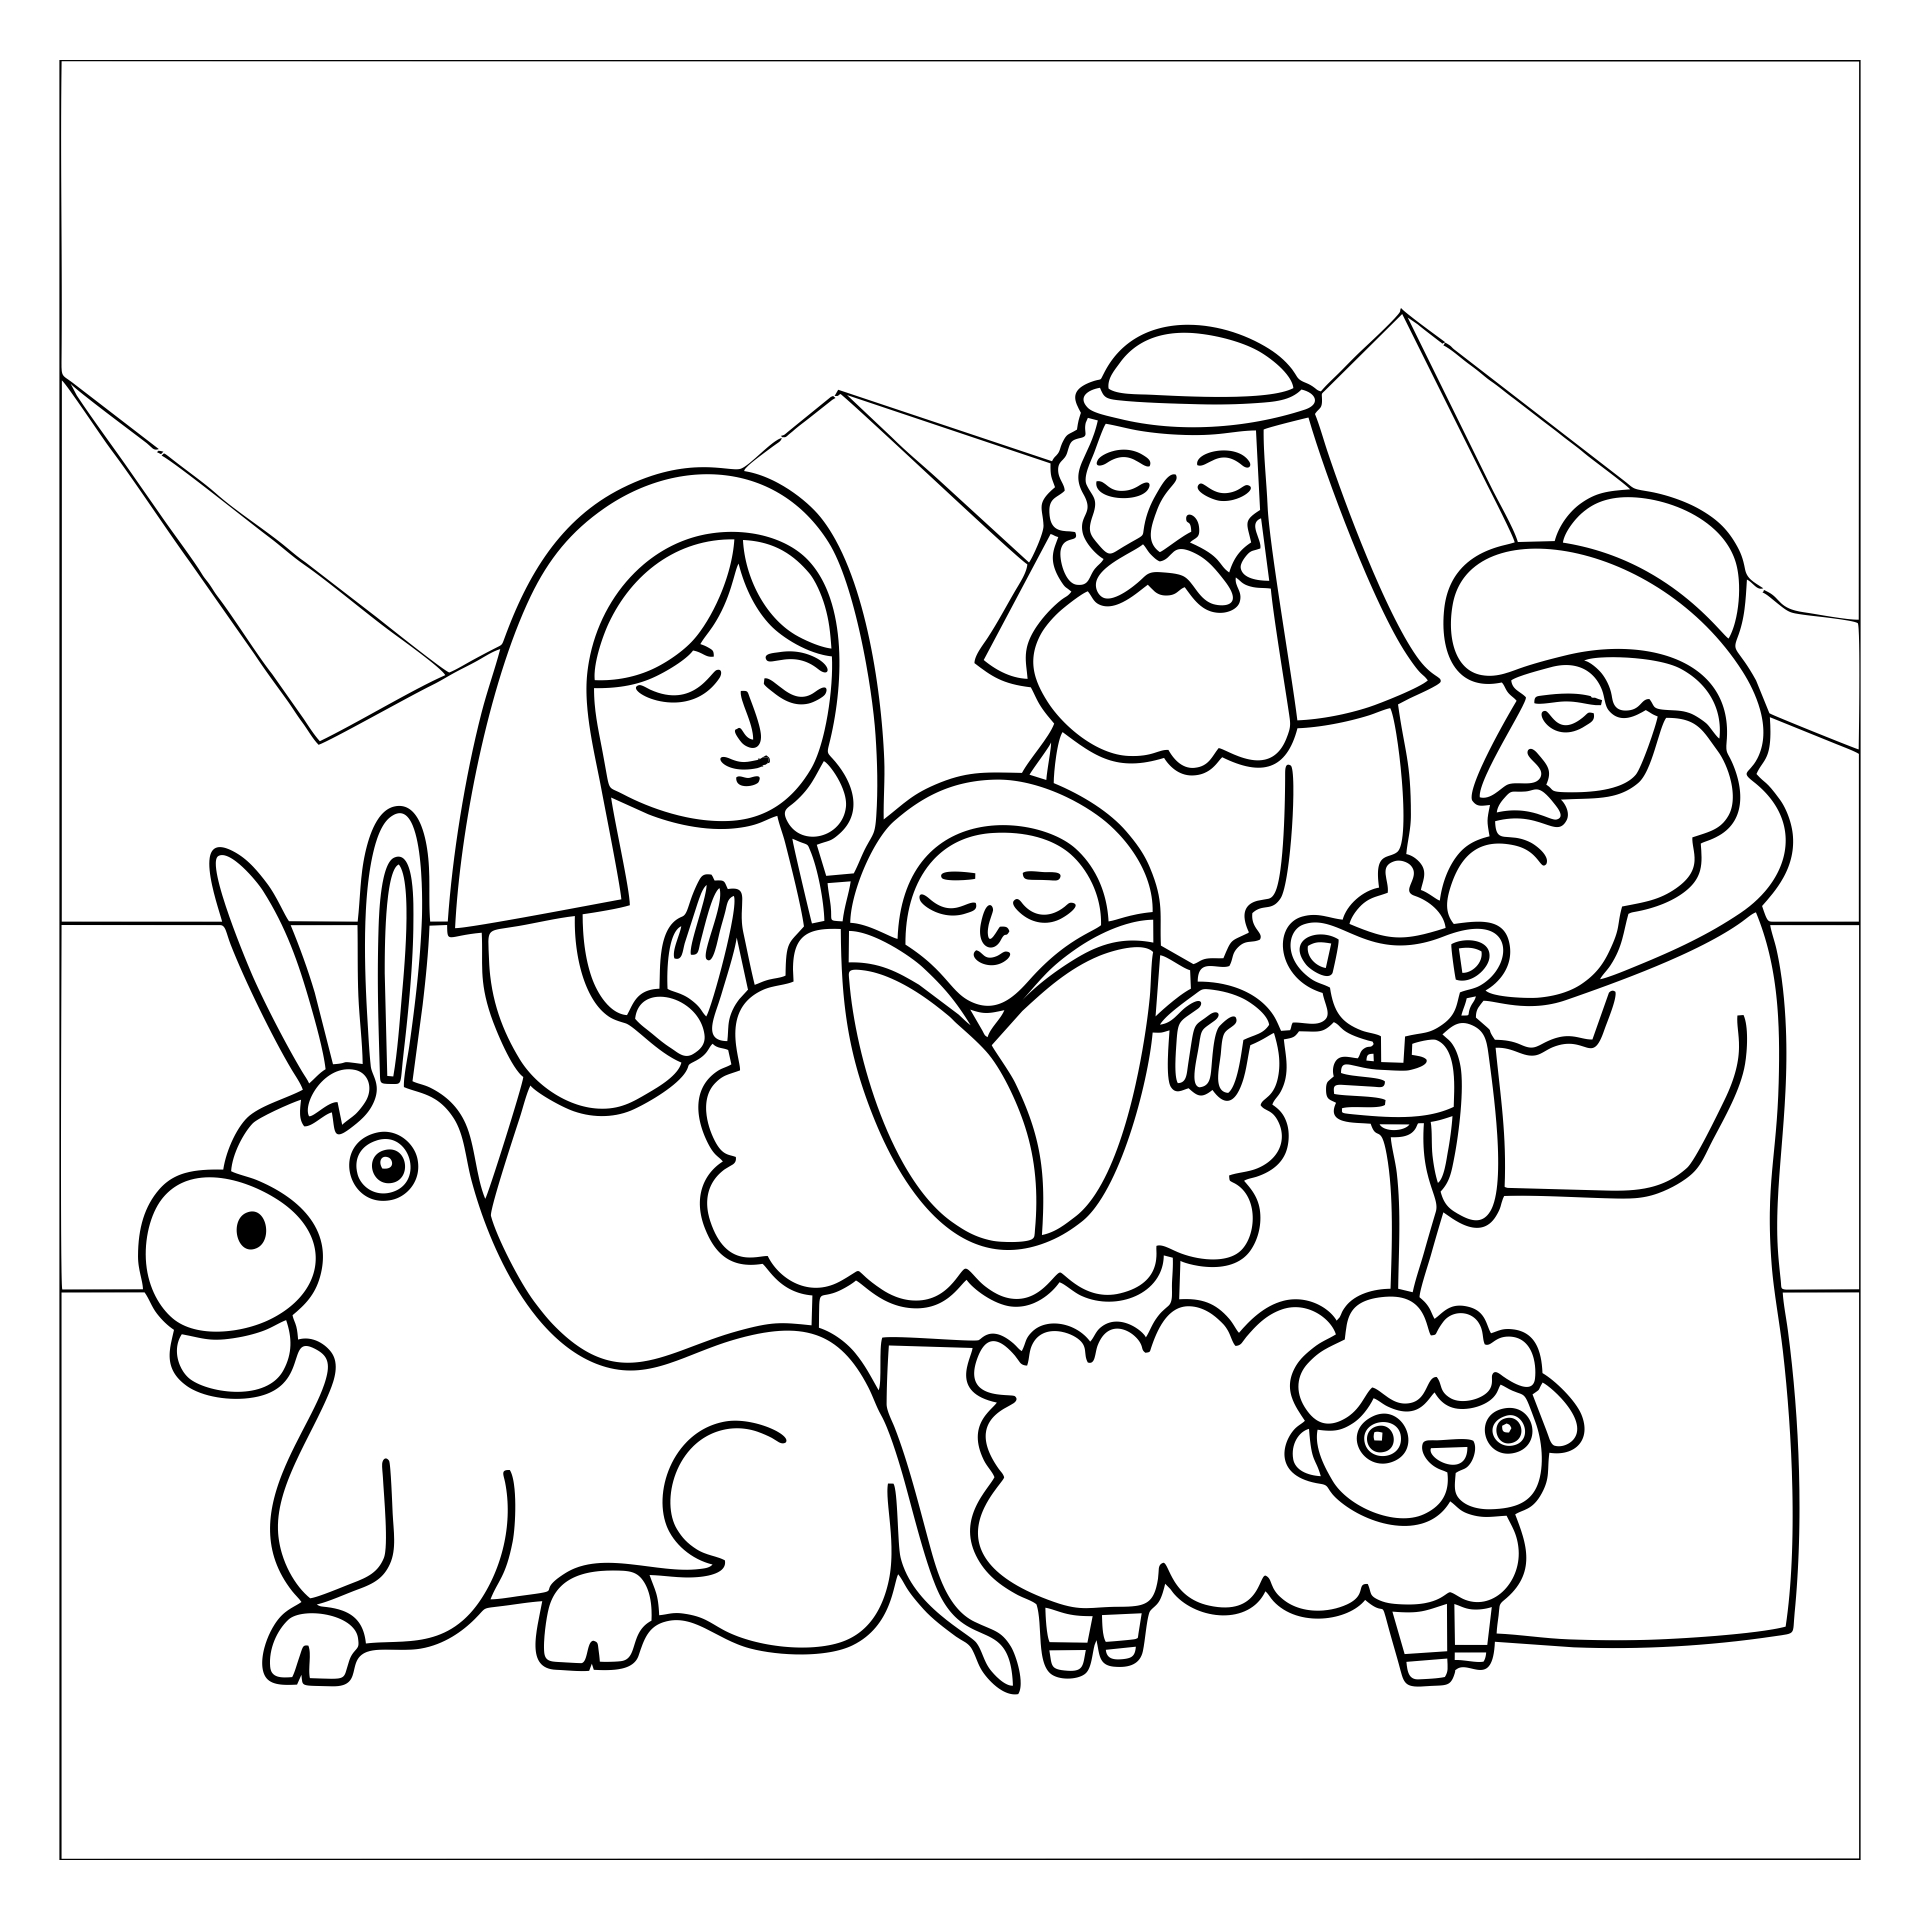 7 Best Images of Nativity Story Printable Book - Printable Nativity